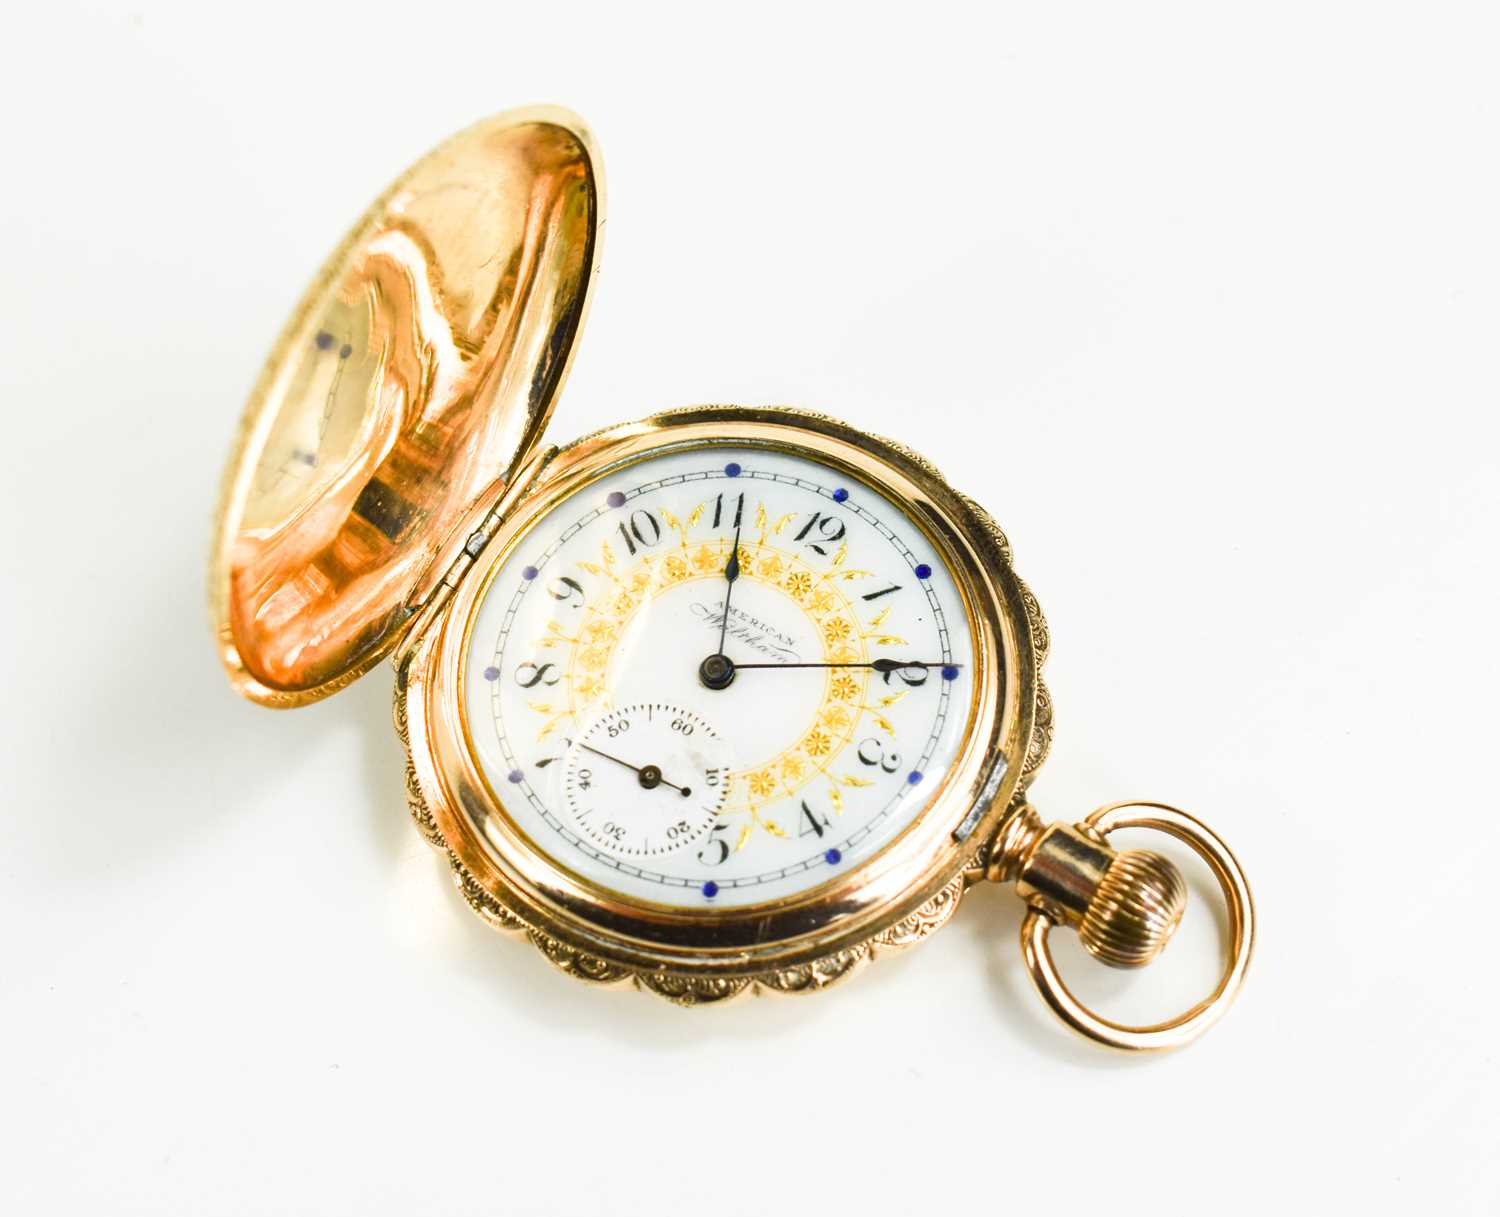 An American Waltham Watch Company keyless wind, gold plated pocket watch, the white enamel signed